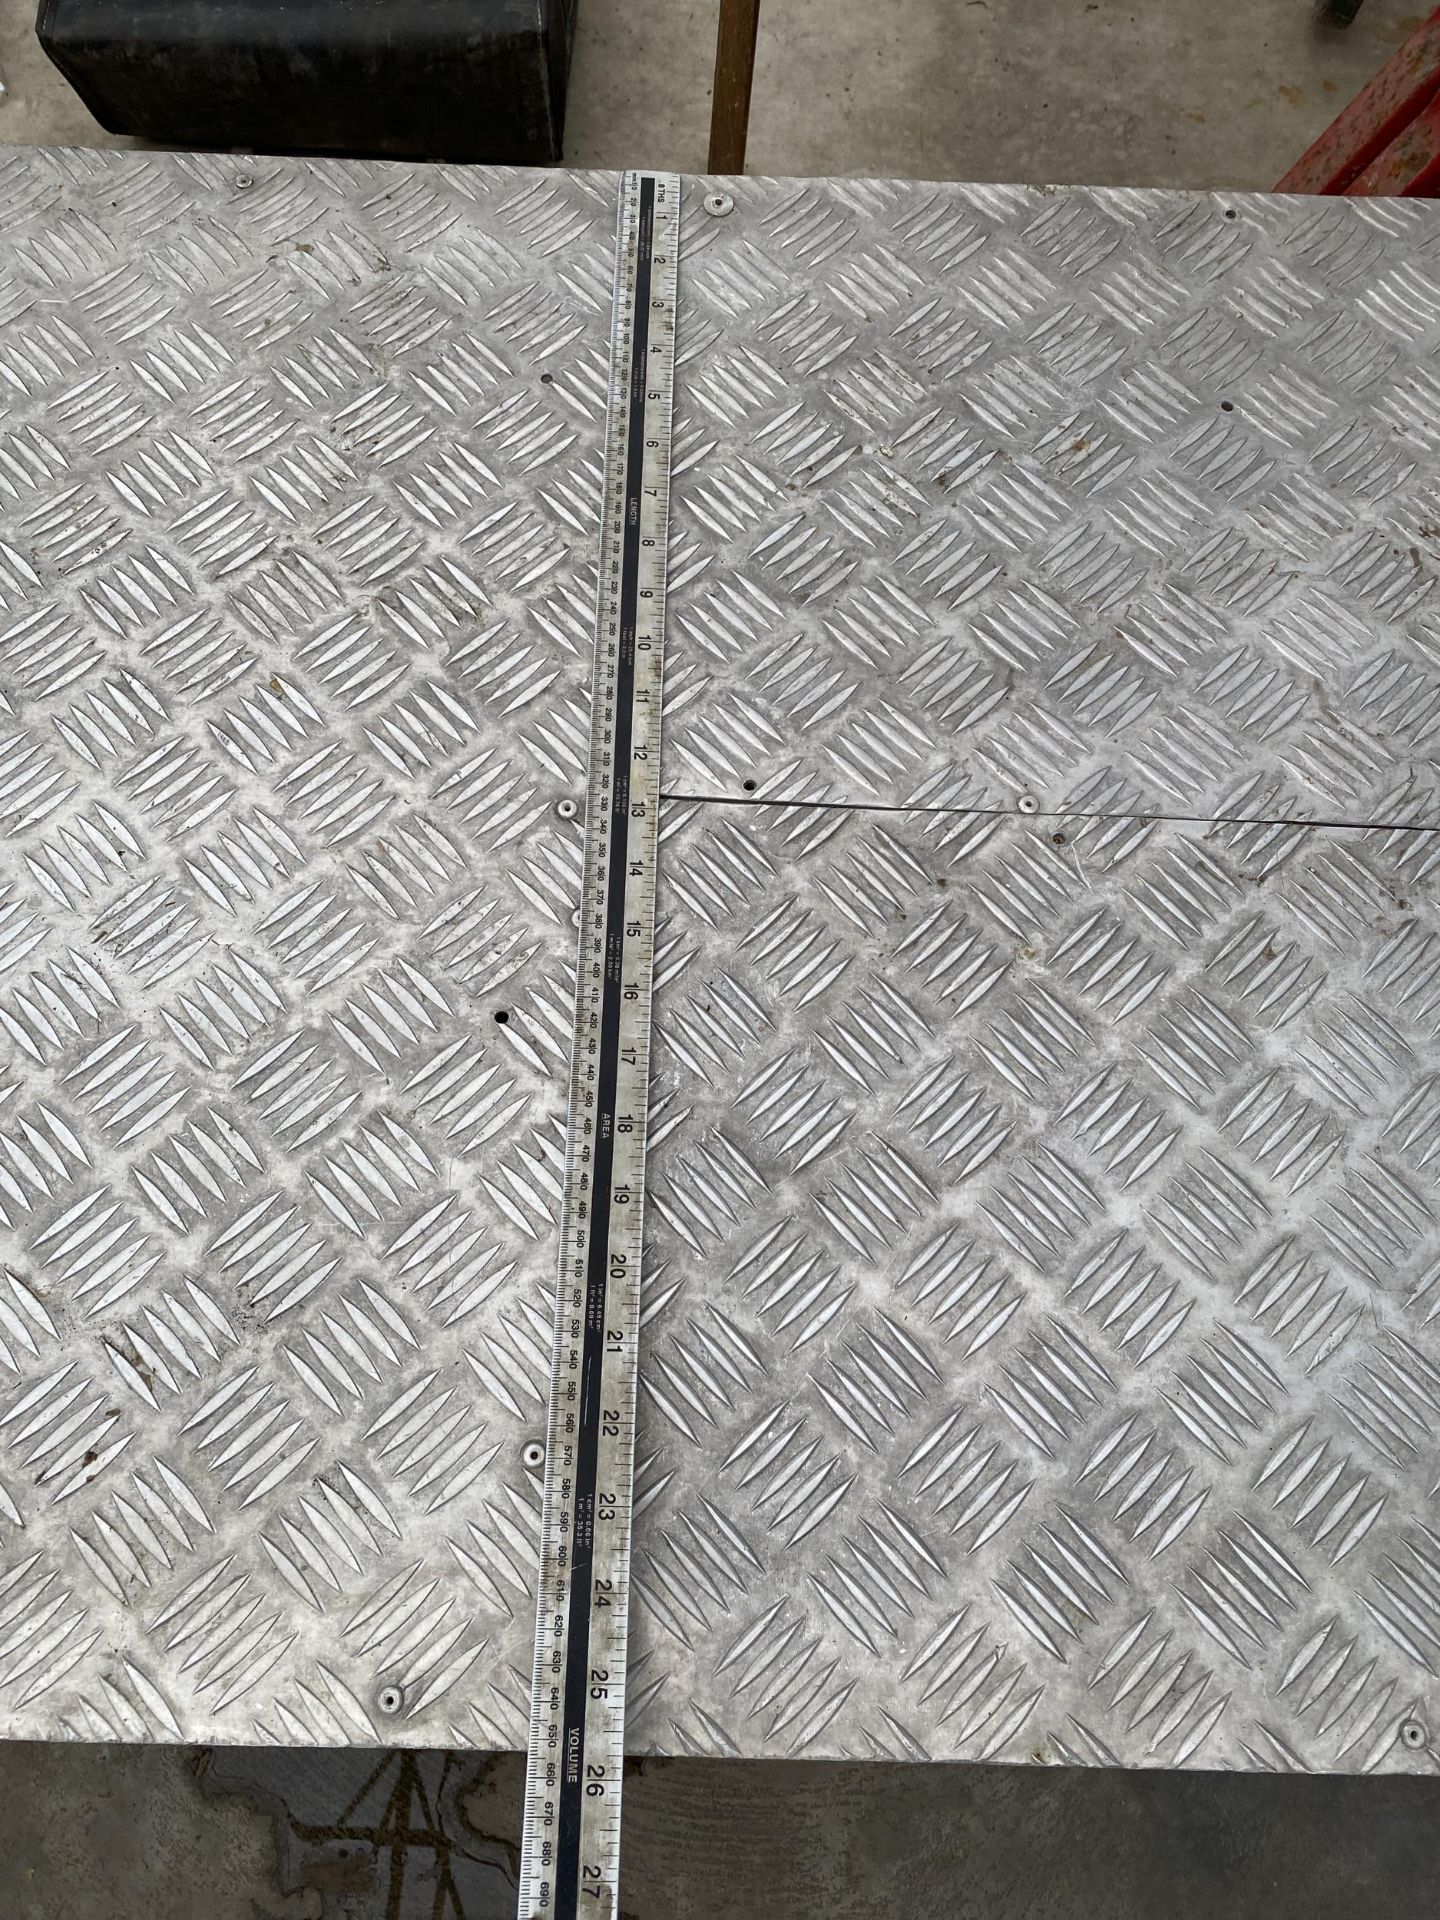 AN ALUMINIUM STEP WITH CHEQUER PLATE FLOOR - Image 3 of 4